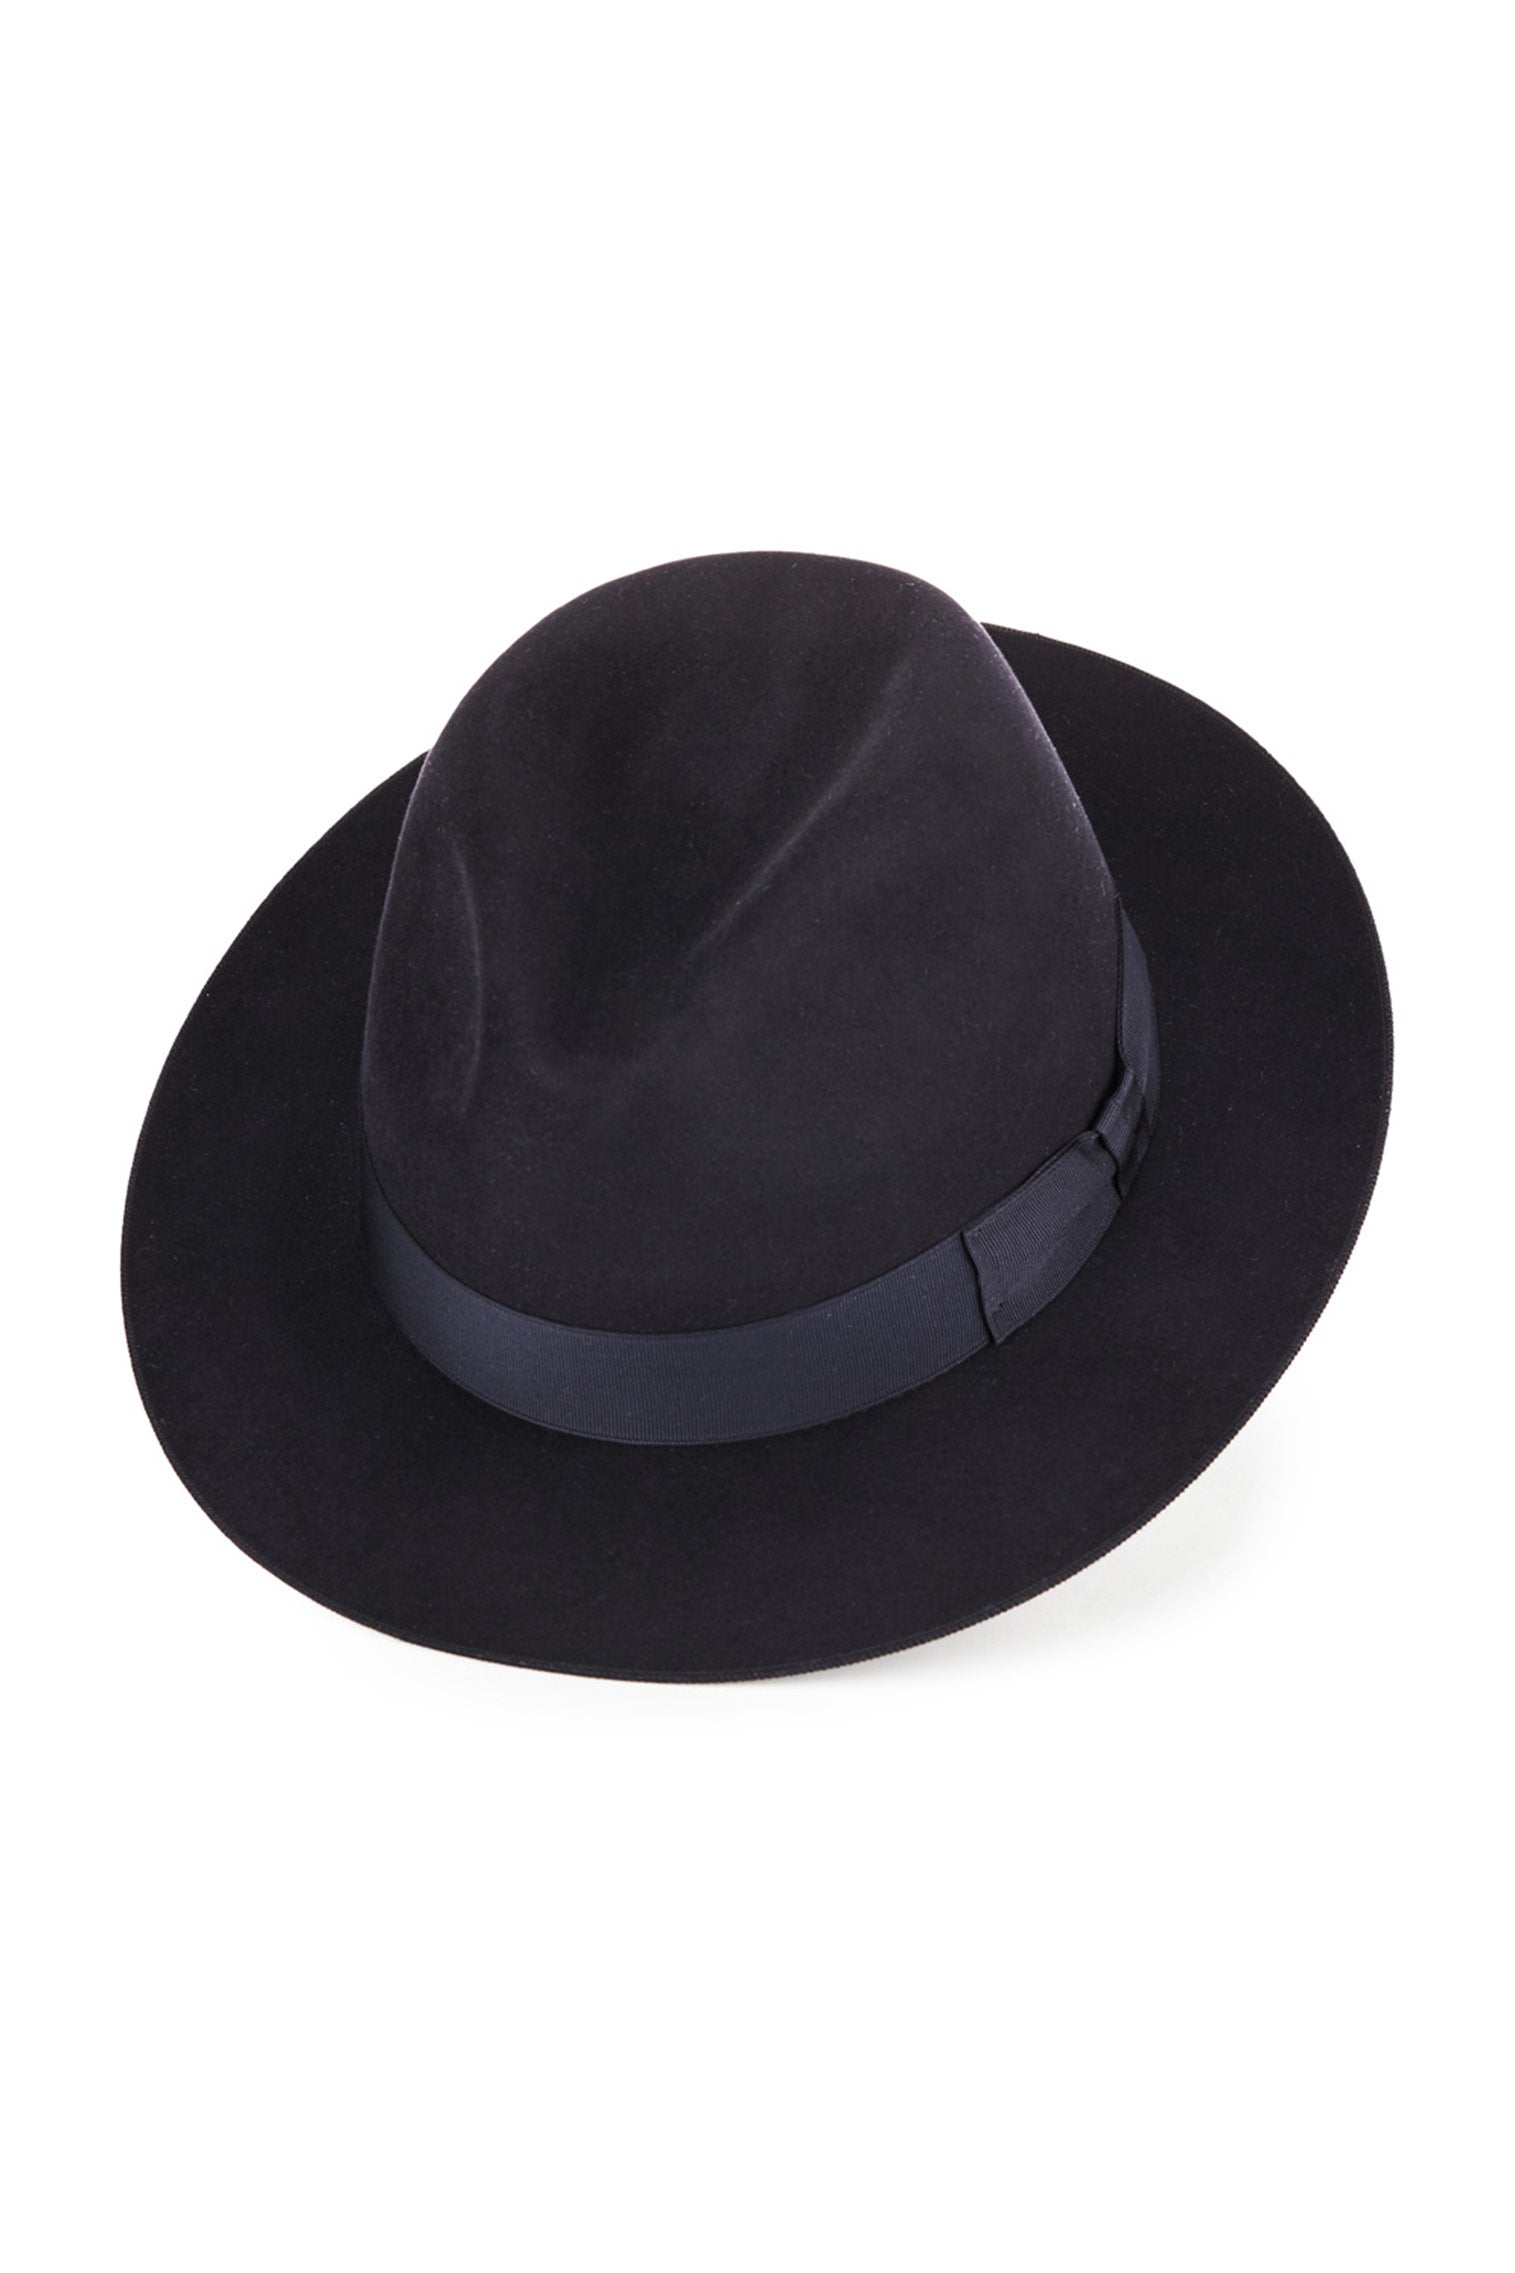 Fairbanks Trilby - Hats for Oval Face Shapes - Lock & Co. Hatters London UK